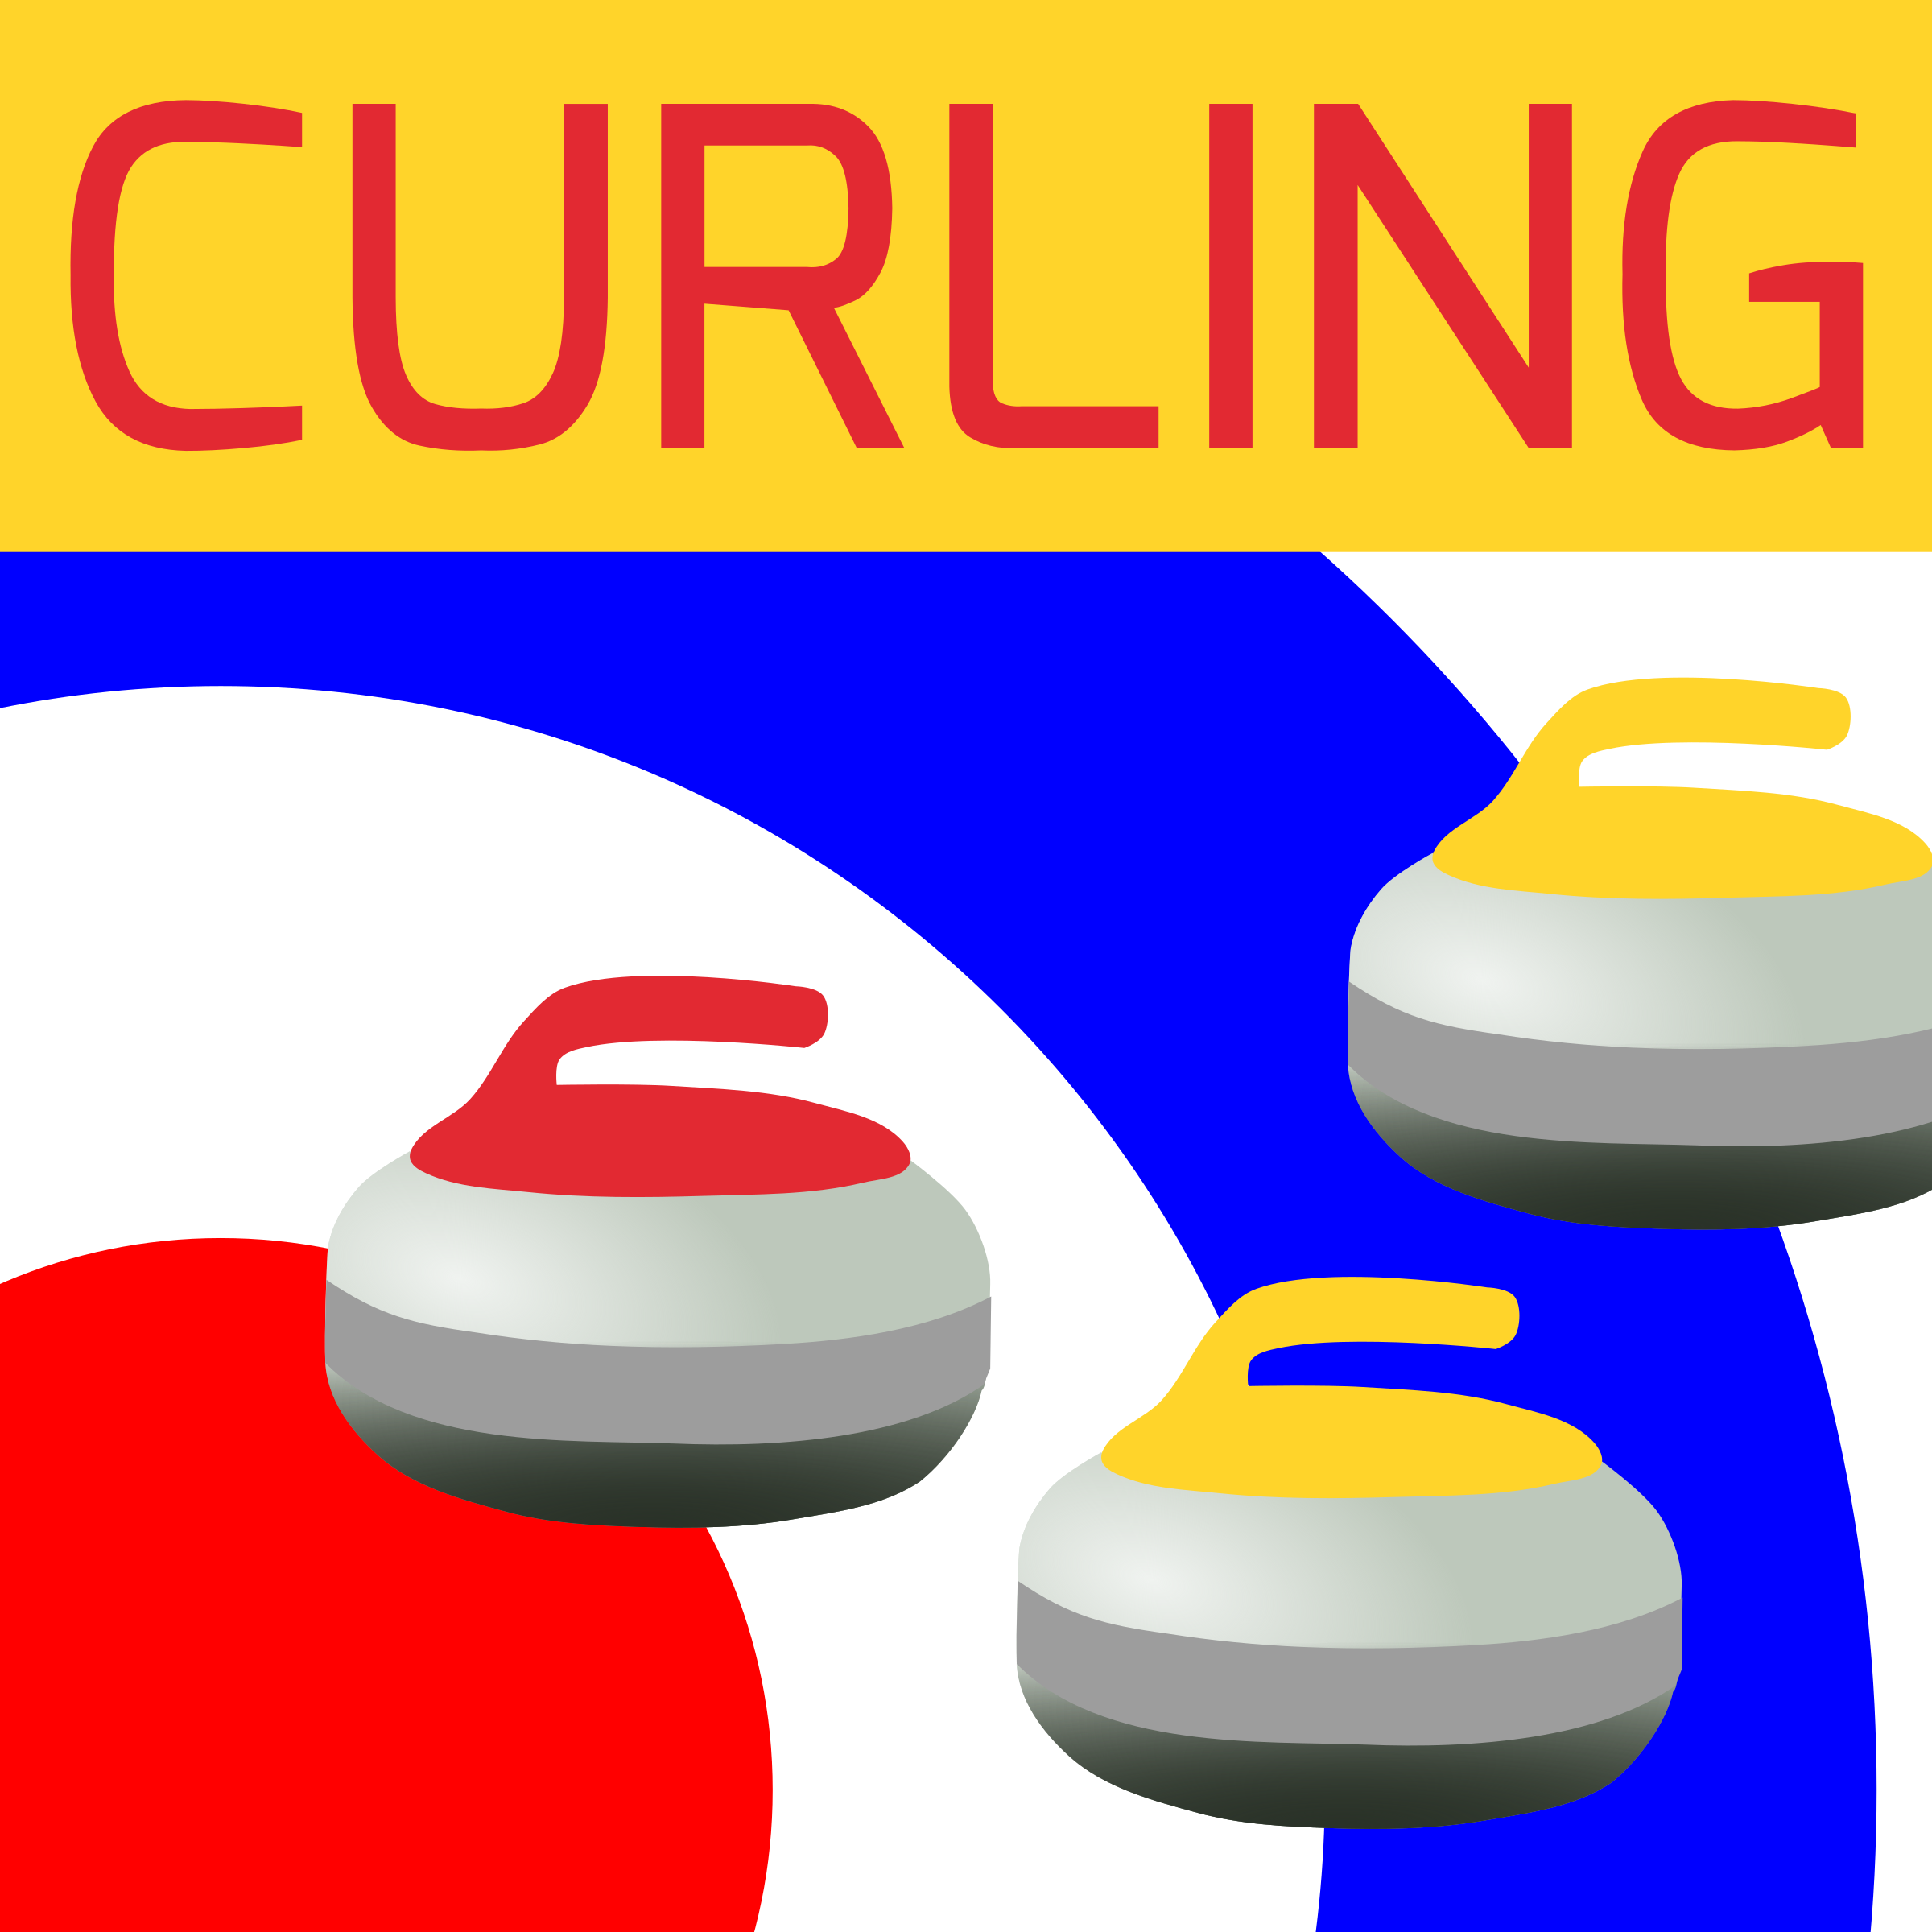 Clip Arts Related To : curling rock and broom clipart. 